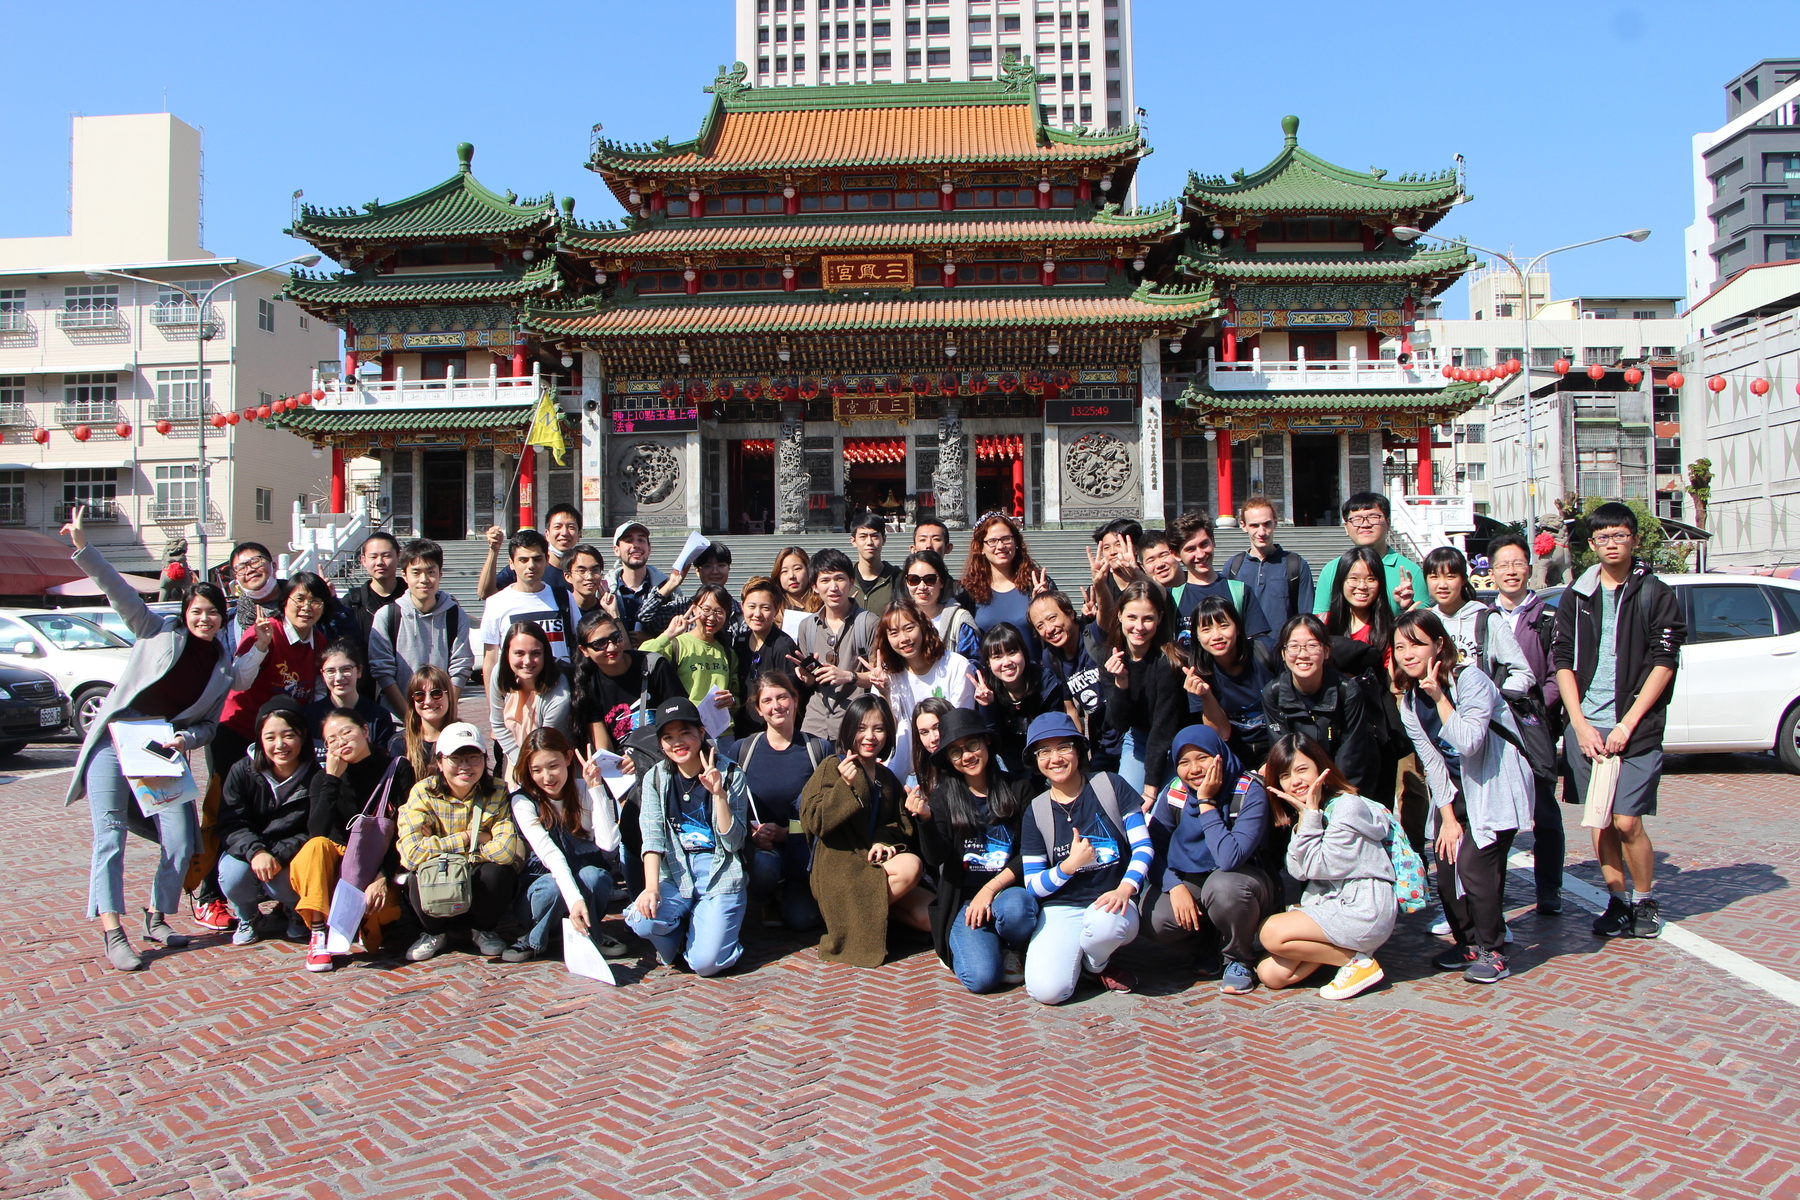 Chinese Language Center introduces international students to Spring Festival activities